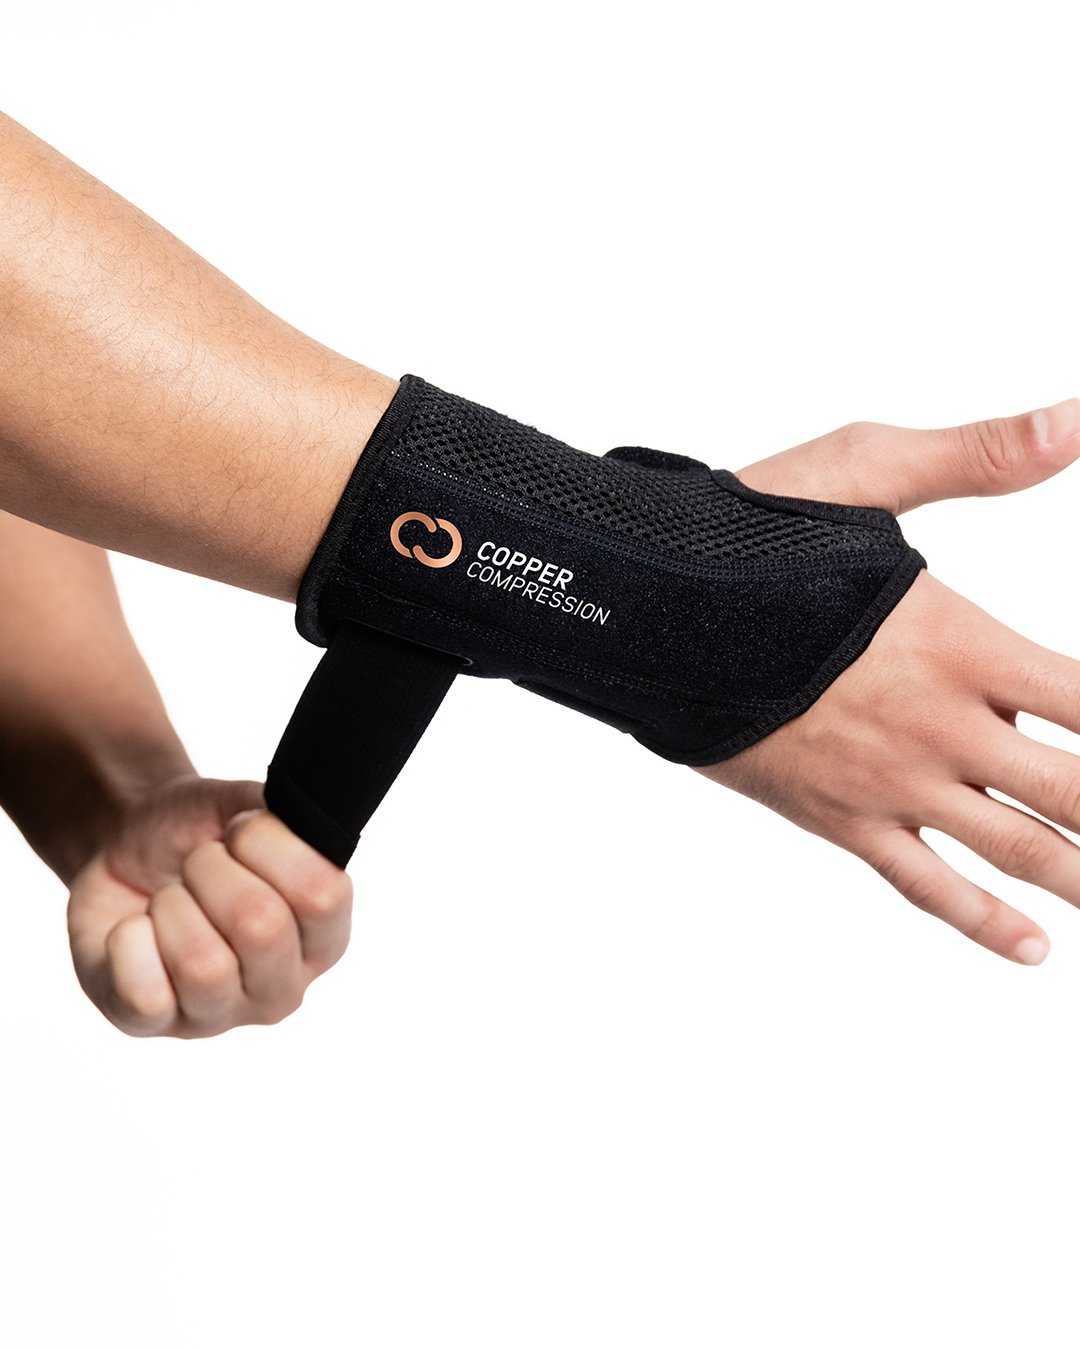 copper wrist brace  Copper Compression Recovery Wrist Brace - Copper  Infused Adjustable Support Splint for Pain, Carpal Tunnel, Arthritis,  Tendonitis, RSI, Sprain. Night Day Splint for Men Women - Fits Left Hand S-M